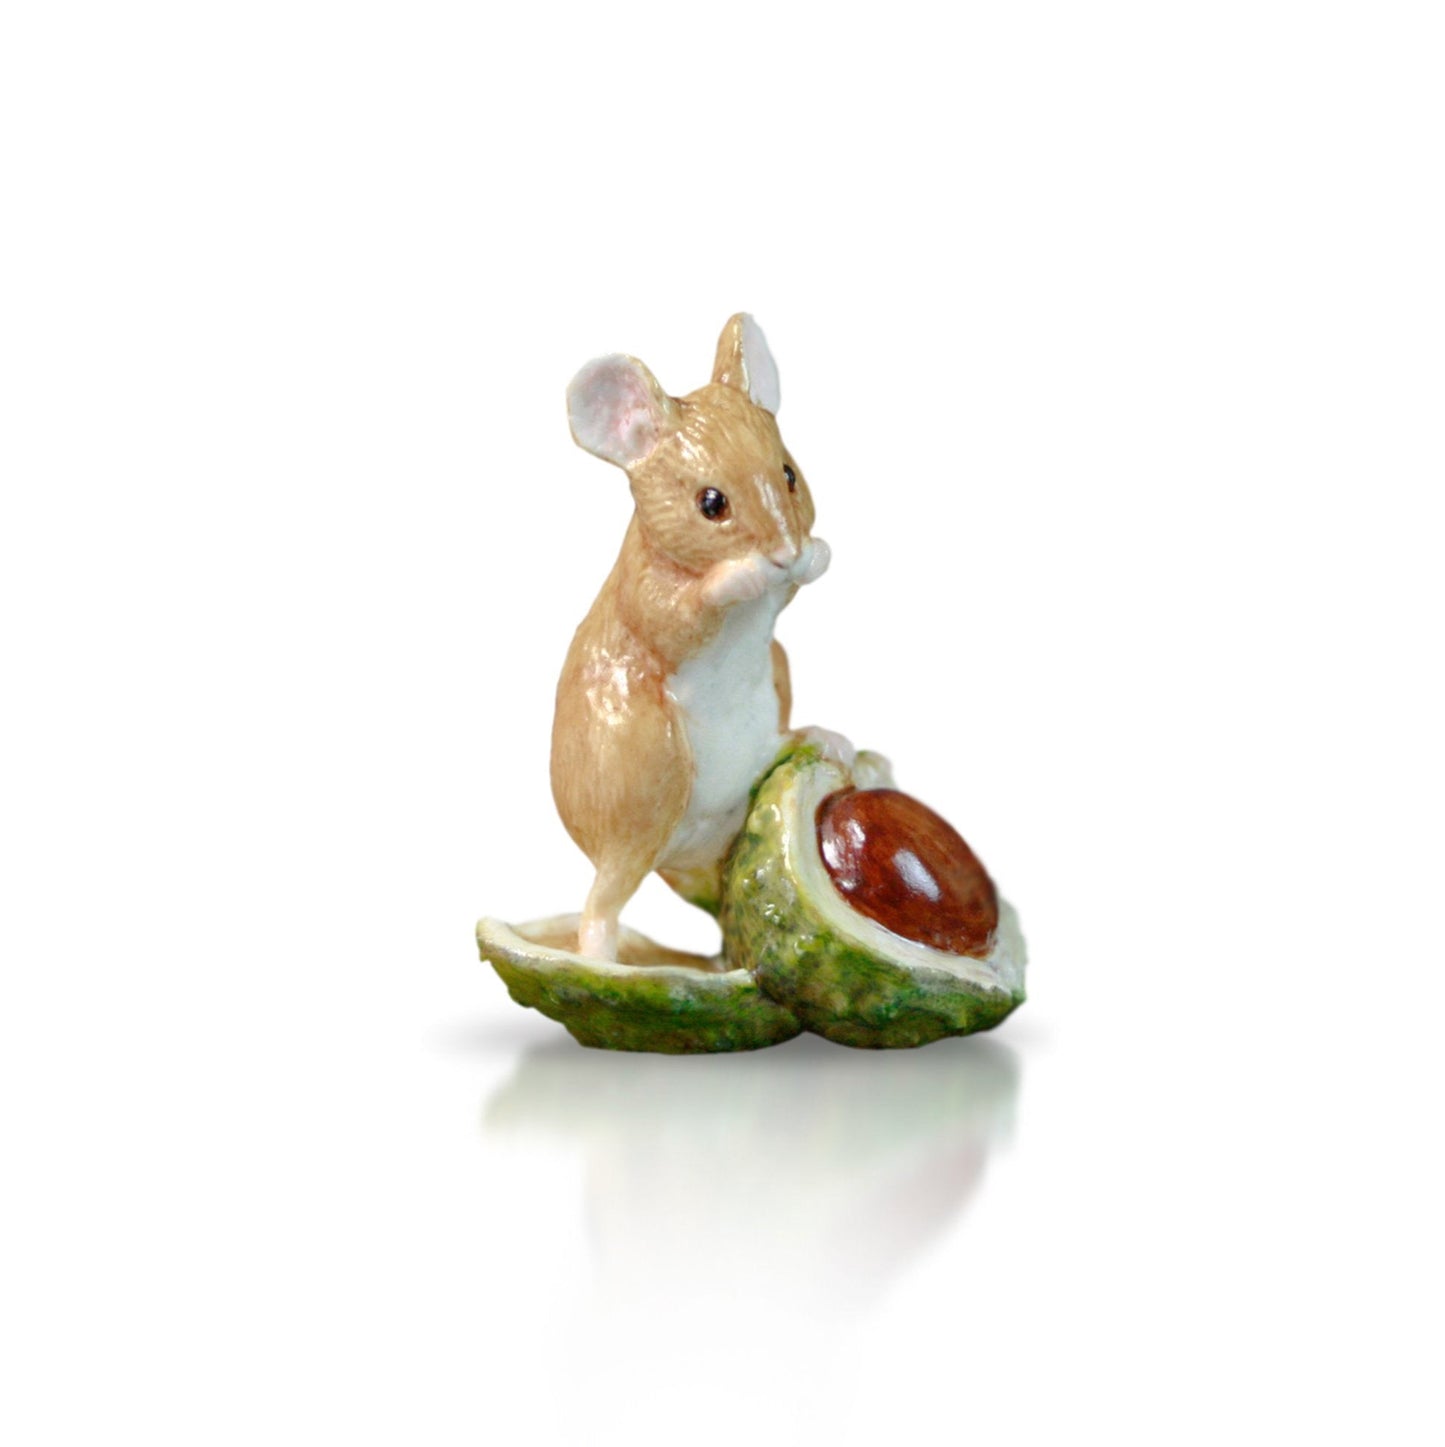 Richard Cooper The Cottage Studio Mouse on Conker by Keith Sherwin